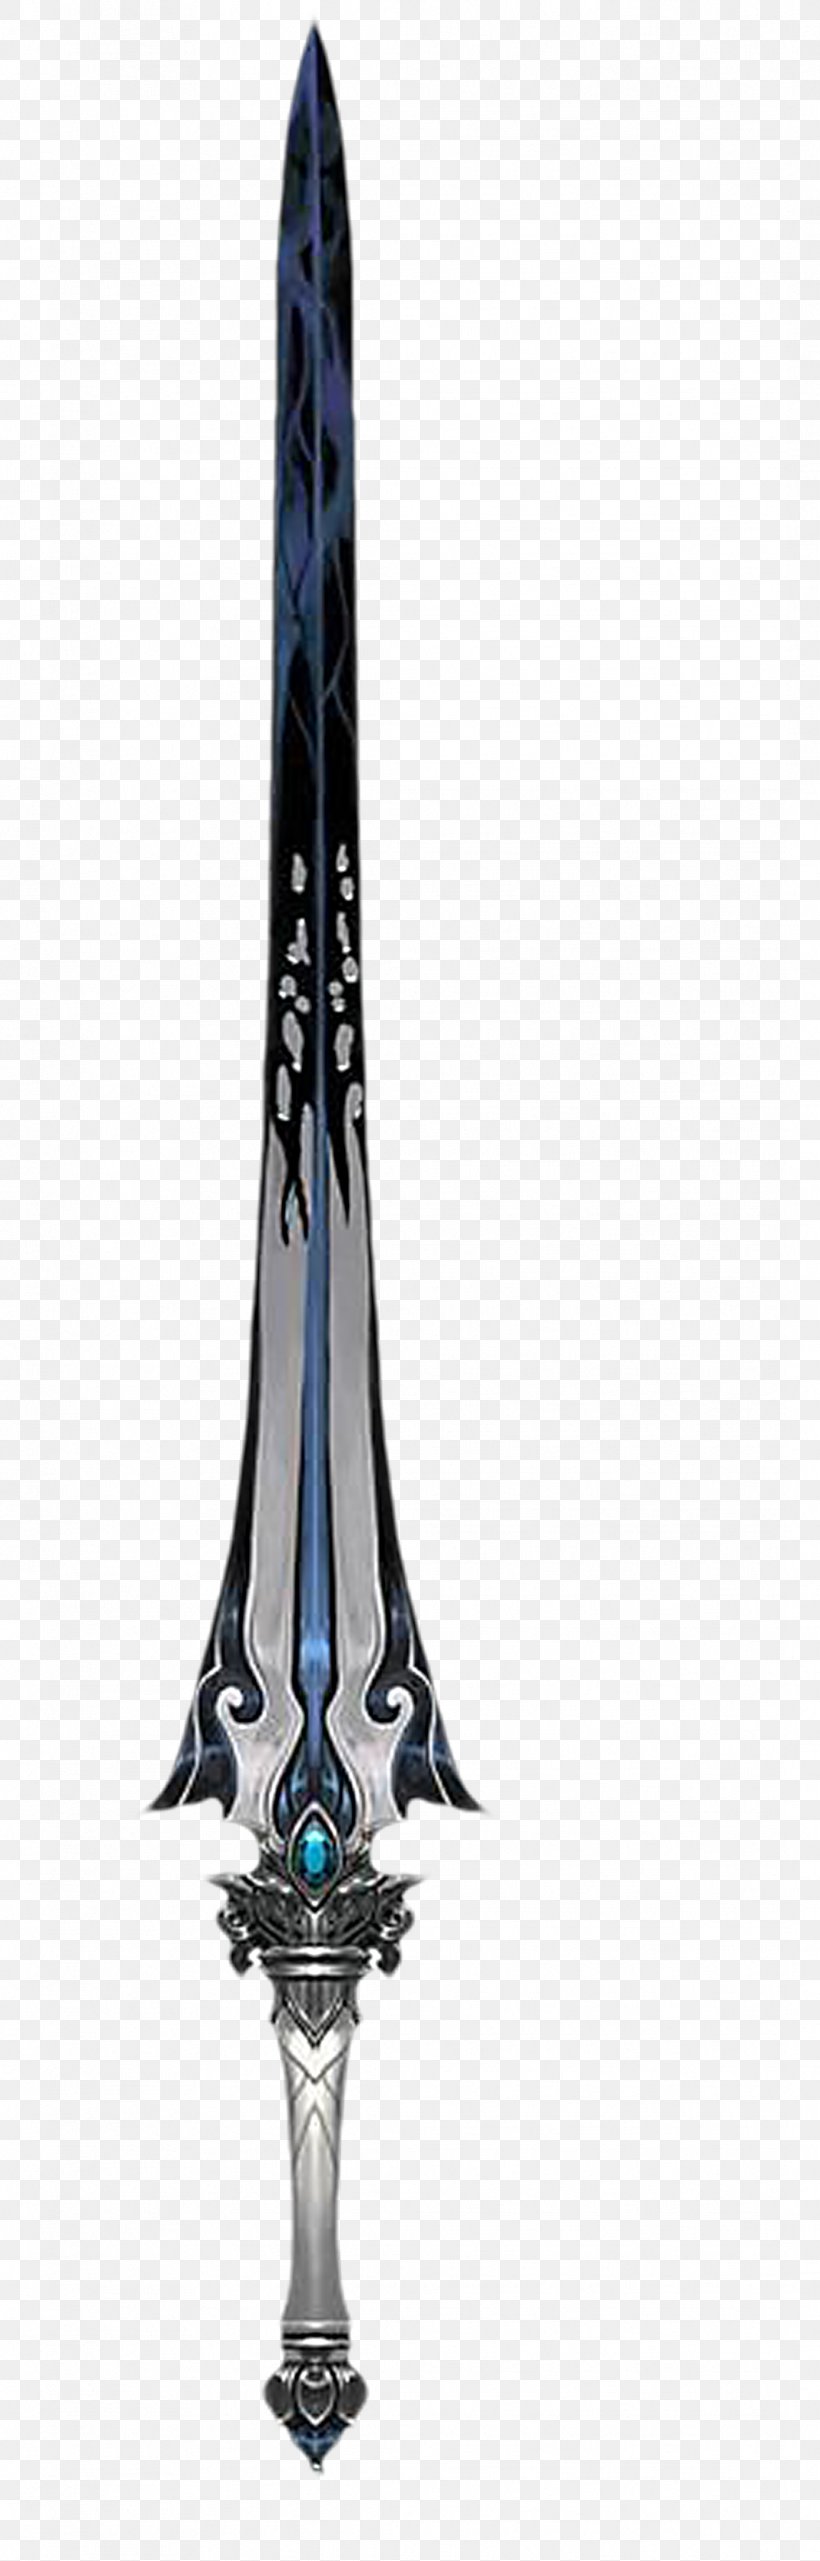 Heavenly Sword Knife Weapon Scabbard, PNG, 1067x3333px, Heavenly Sword, Blade, Chinese Swords, Cold Steel, Cold Weapon Download Free